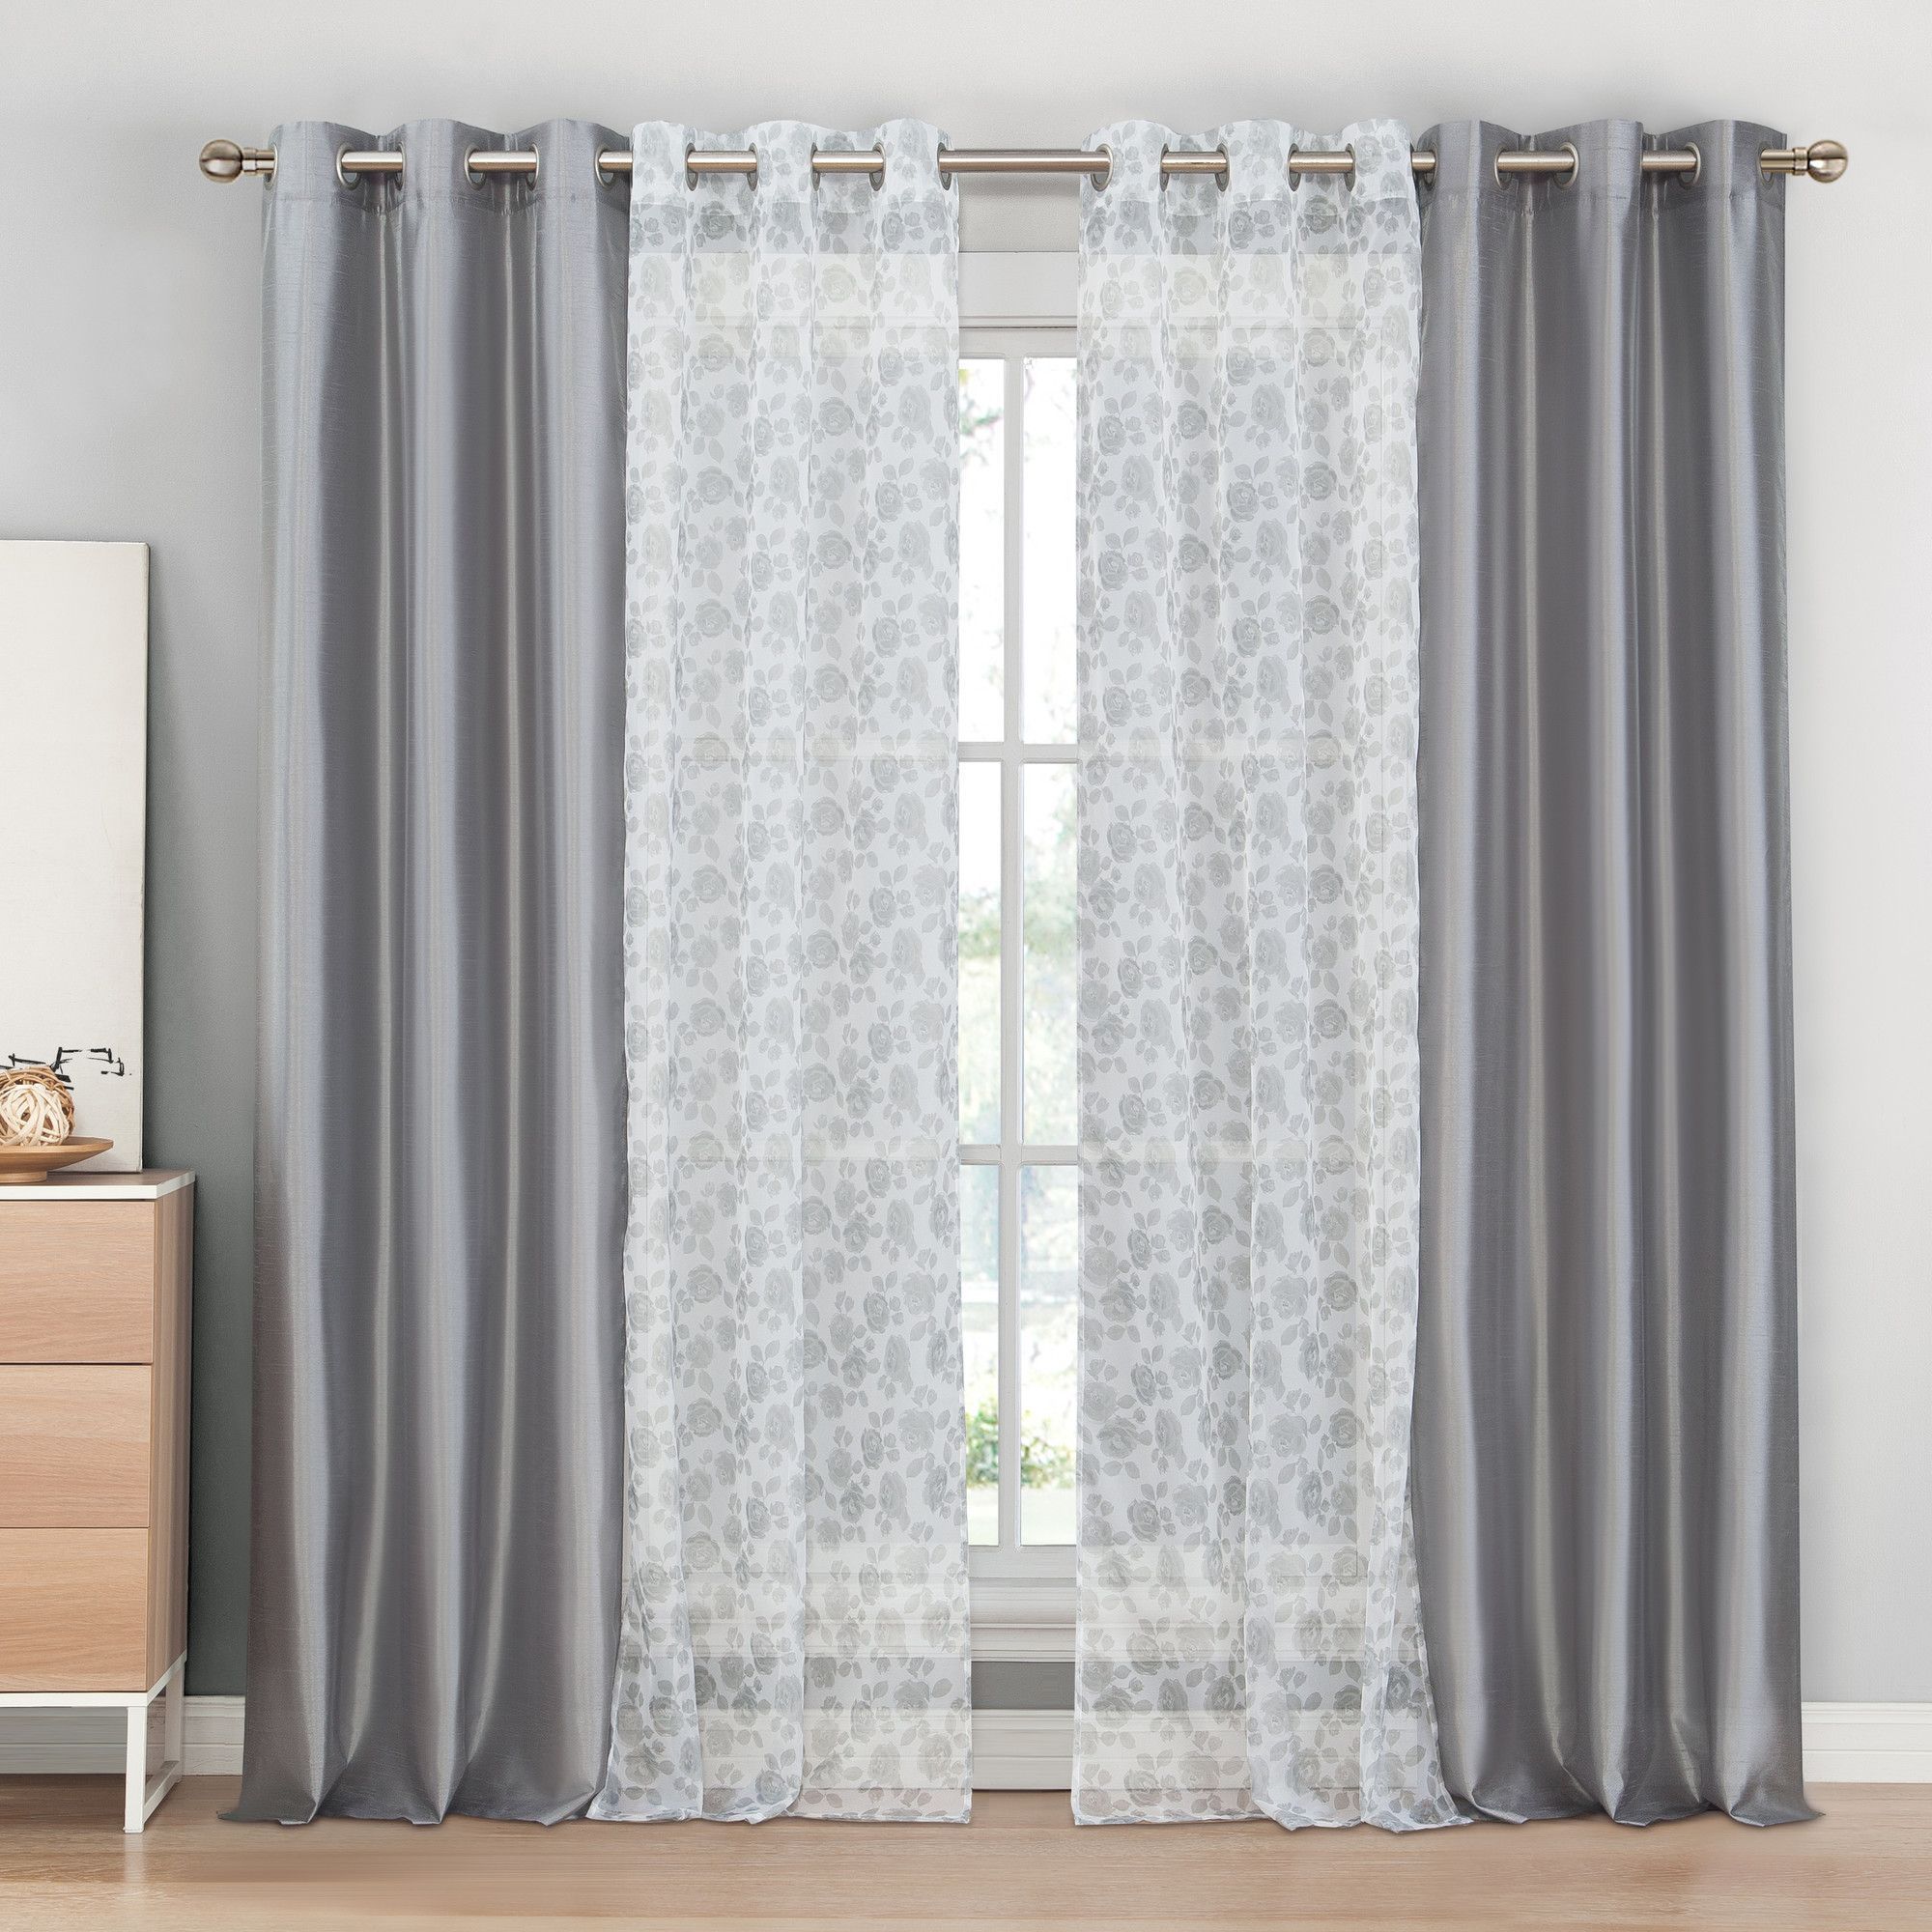 Amanda 4 Piece Curtain Panel Set | Products In 2019 | Panel Intended For Laya Fretwork Burnout Sheer Curtain Panels (View 14 of 20)